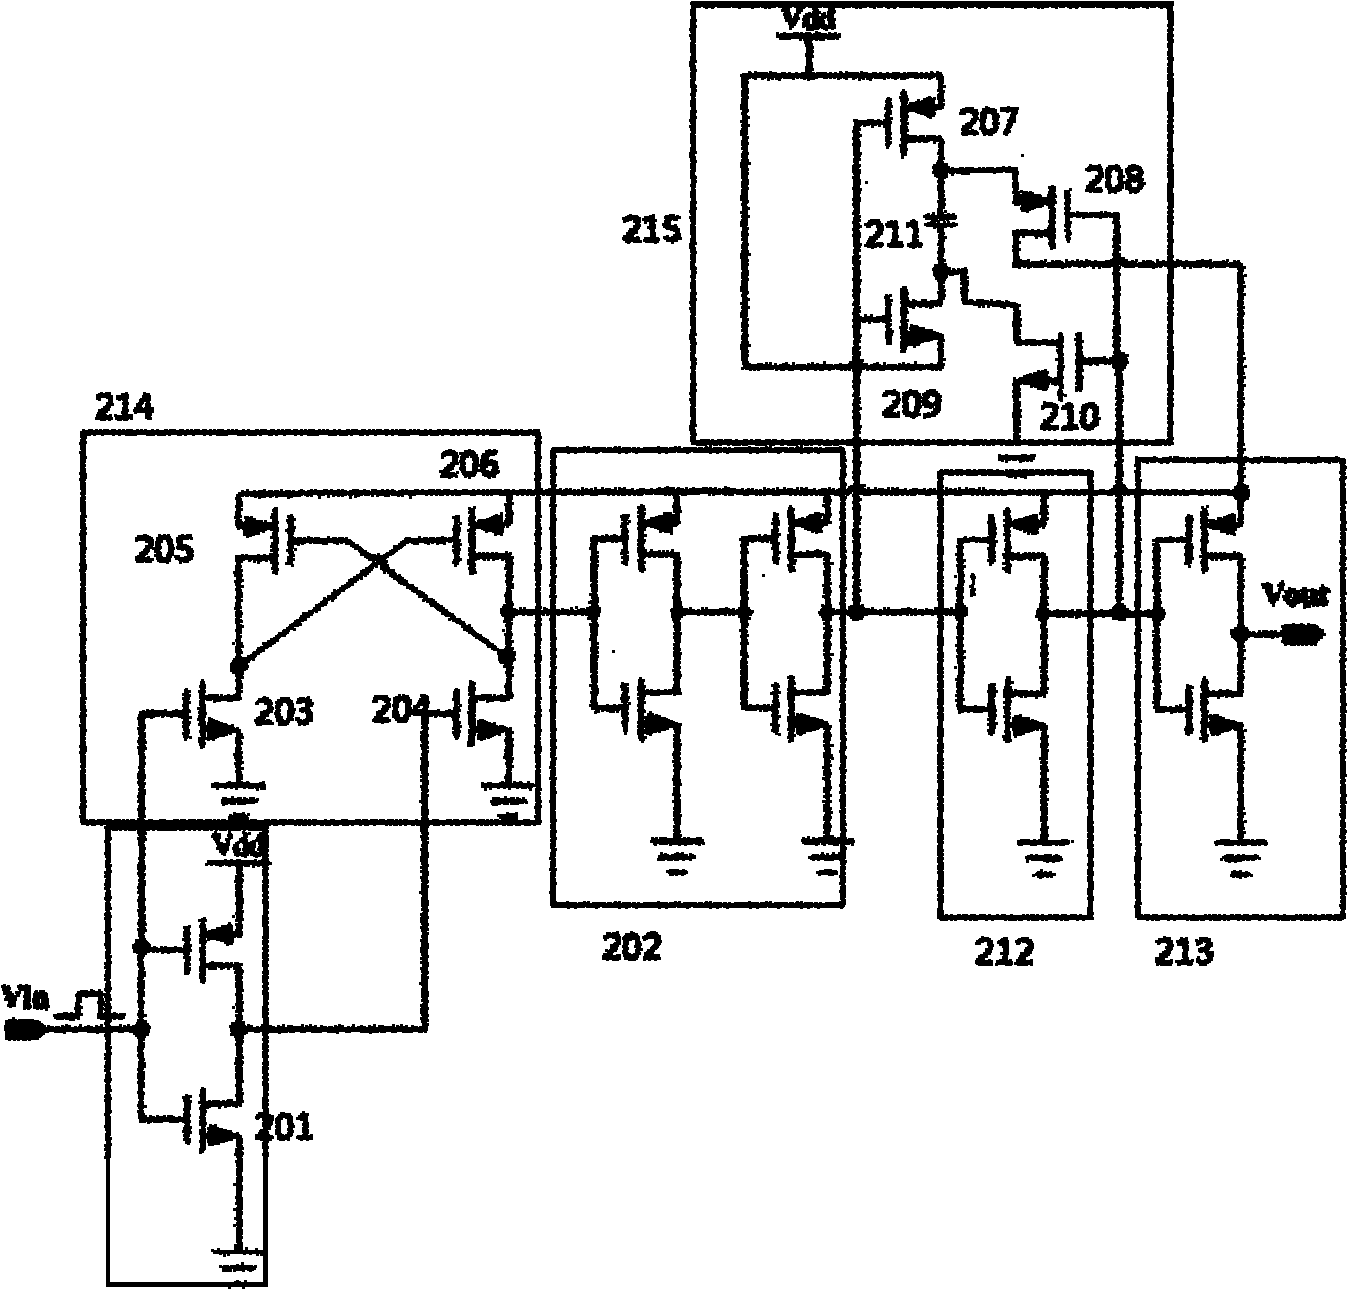 Drive bootstrap circuit for switching tube of switching power supply converter